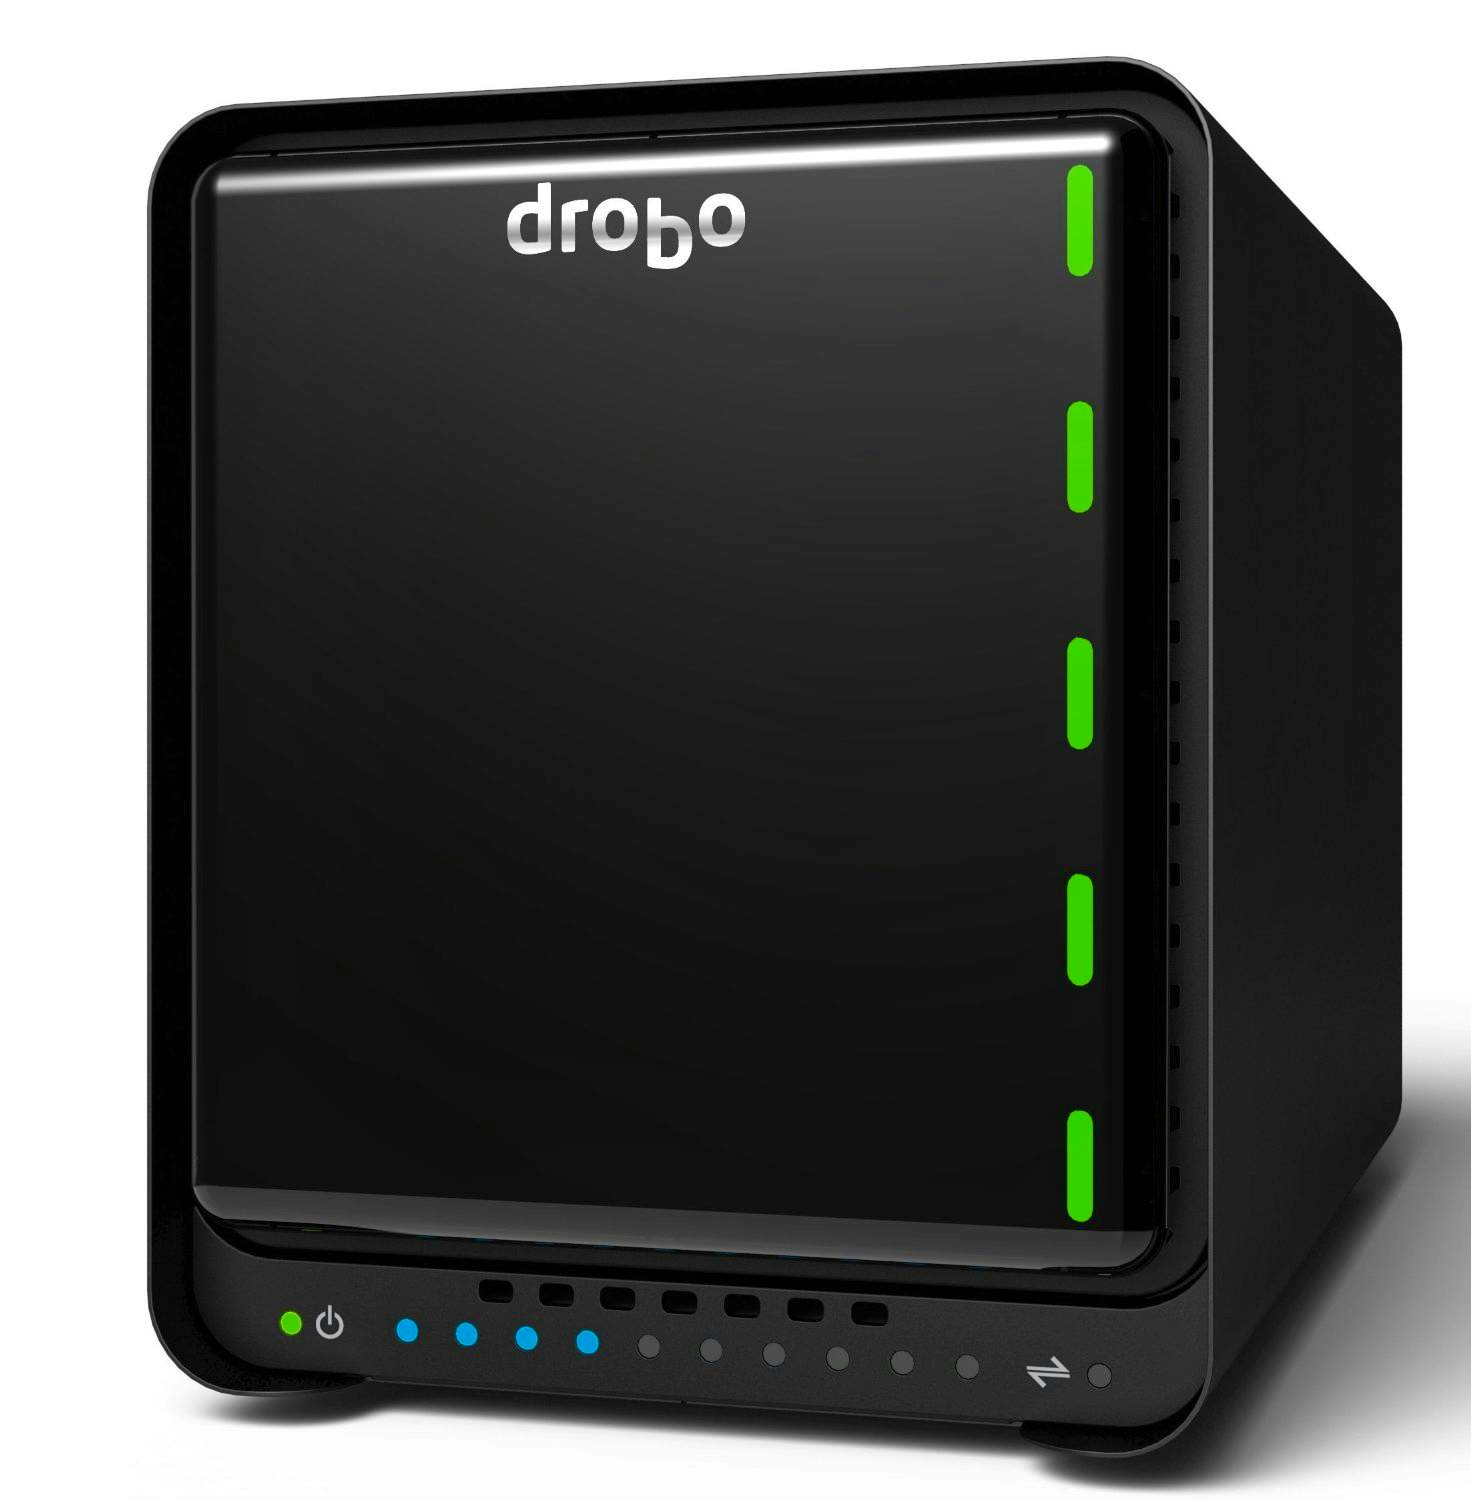 Drobo can store all your data and keep it safe Technology Dallas News